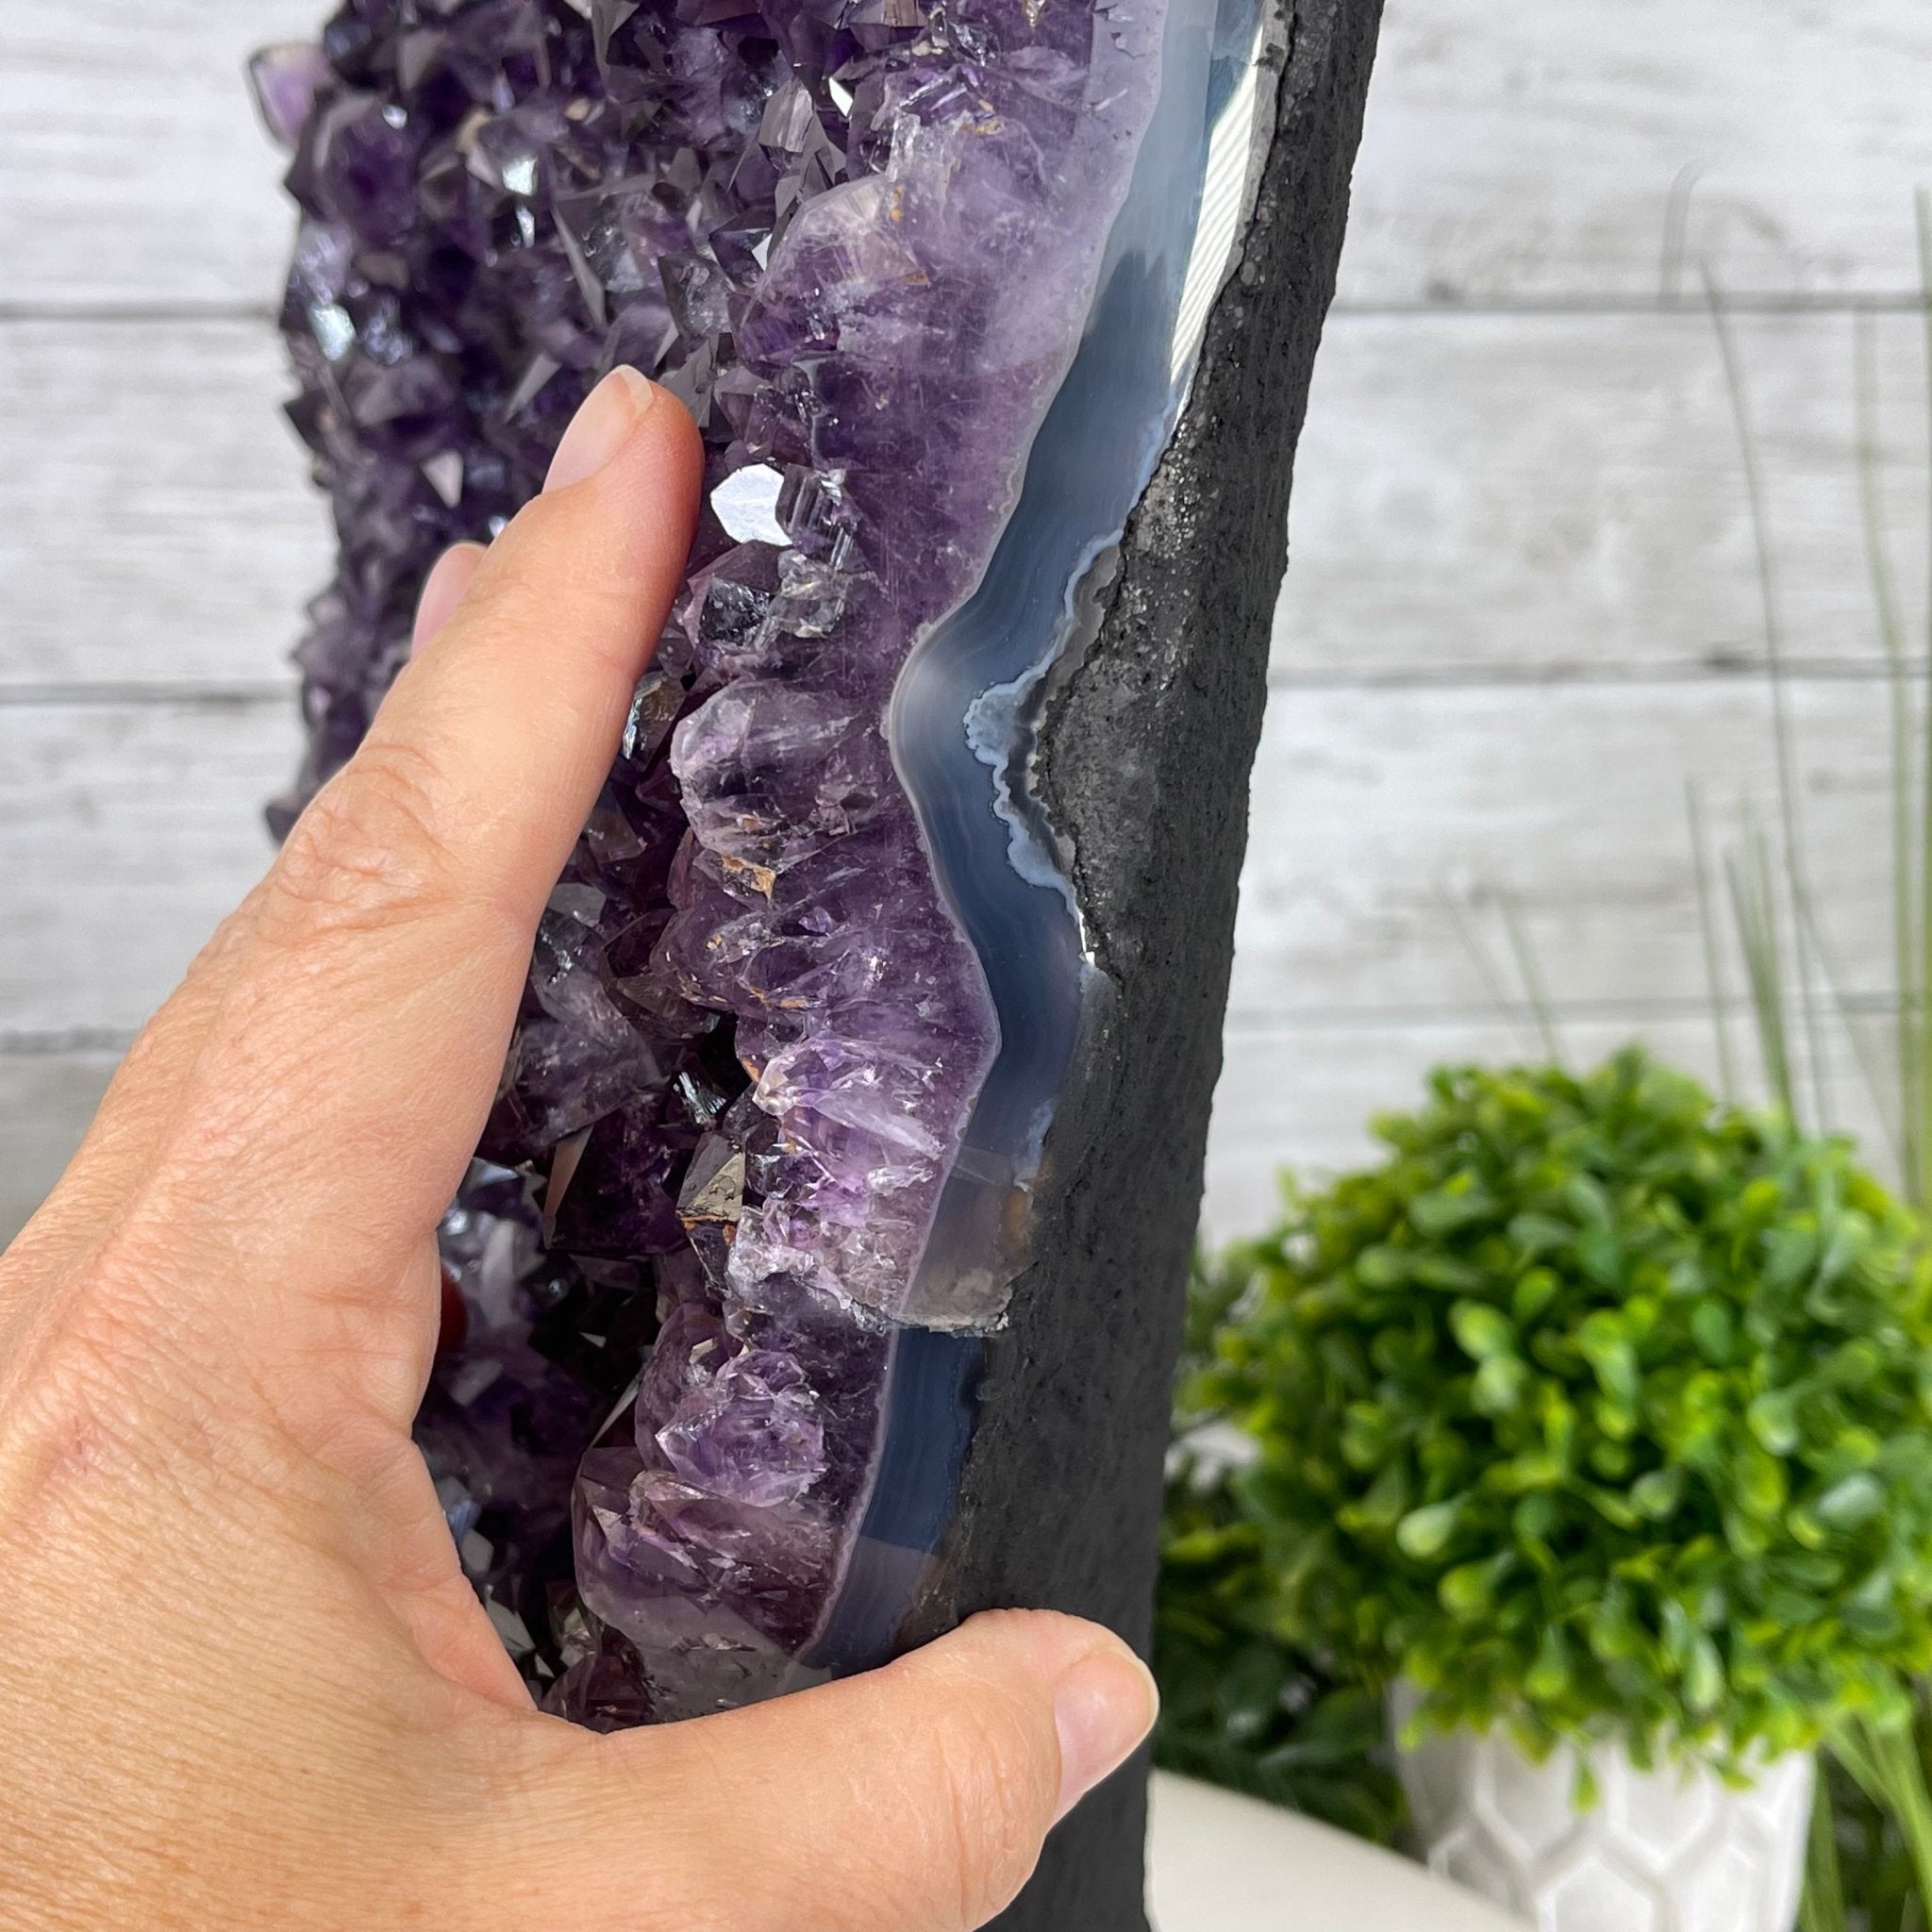 Extra Quality Amethyst Druse Cluster on Cement Base, 38.4 lbs and 23" Tall #5614-0053 - Brazil GemsBrazil GemsExtra Quality Amethyst Druse Cluster on Cement Base, 38.4 lbs and 23" Tall #5614-0053Clusters on Cement Bases5614-0053